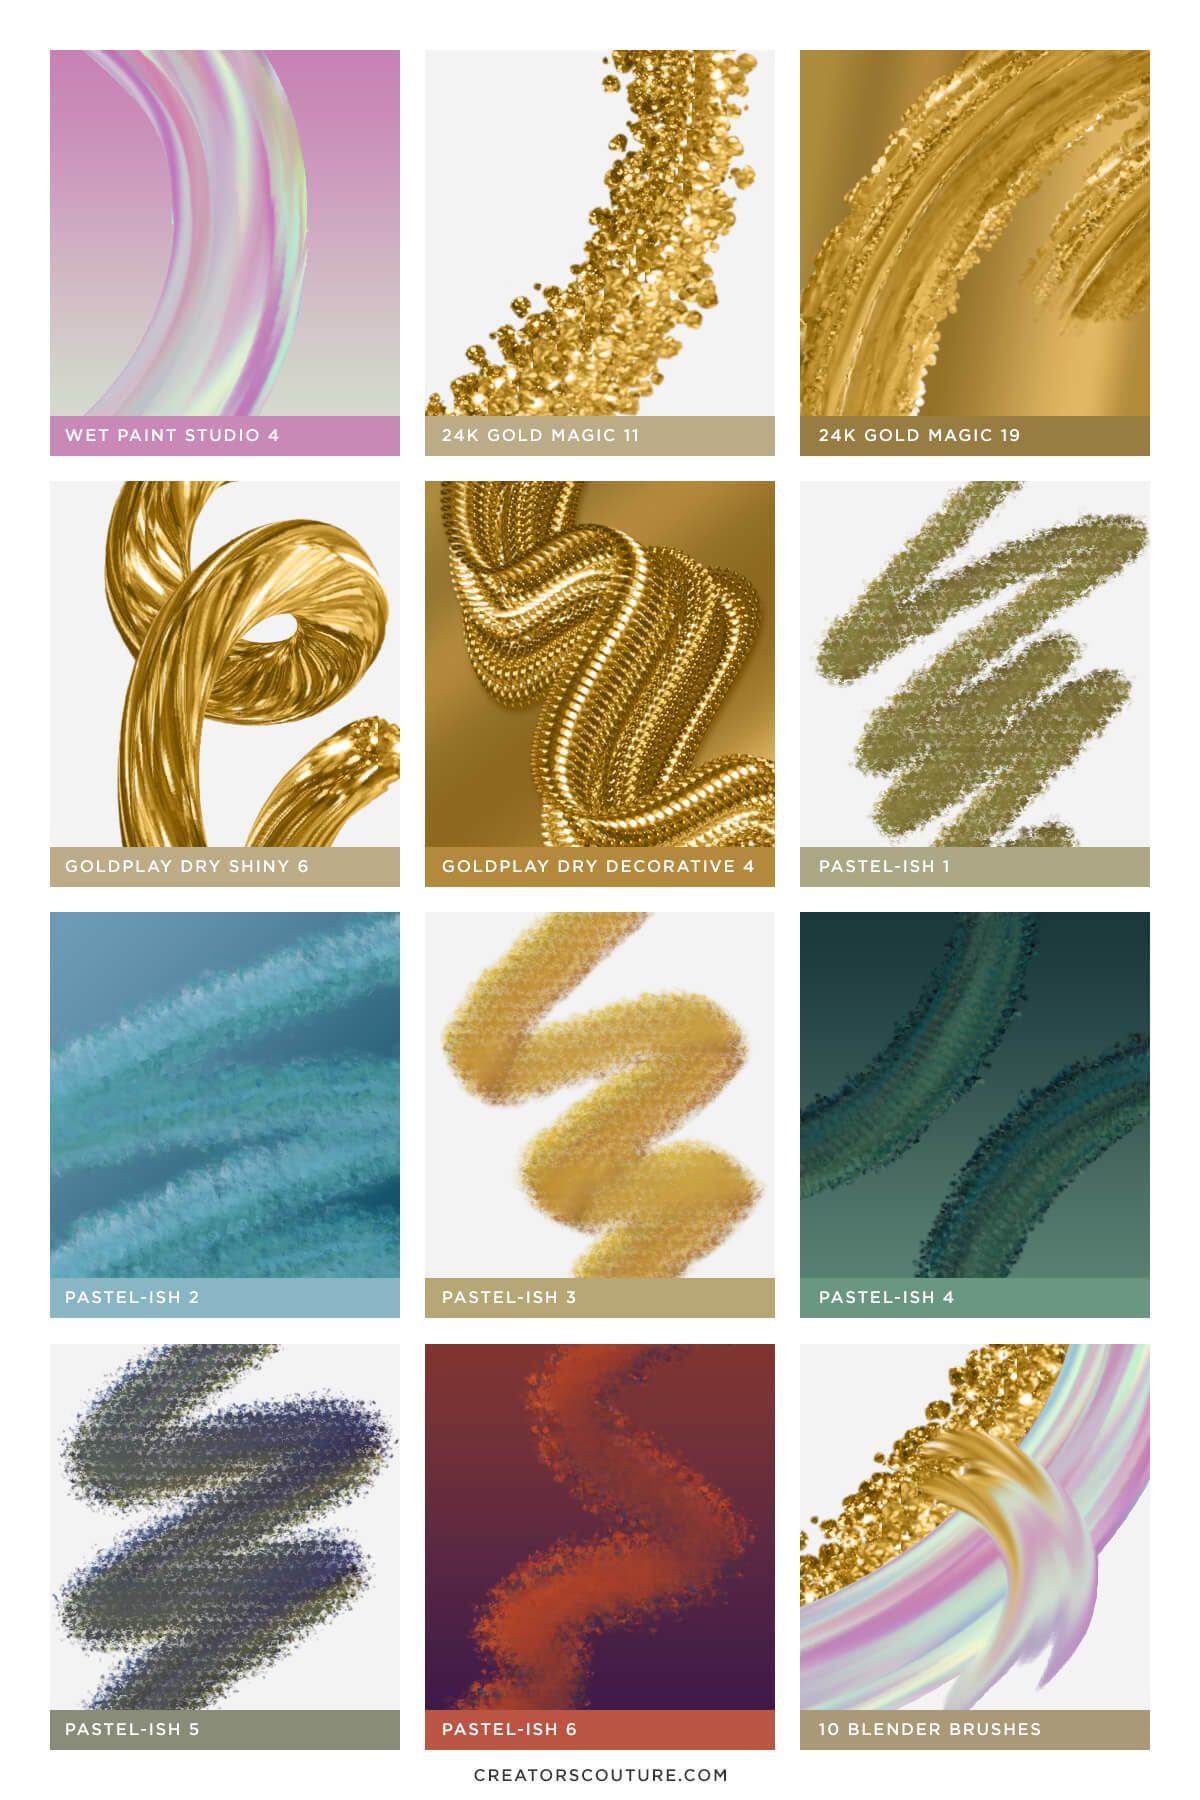 preview of wet paint photoshop brushes, including iridescent wet brushes, 24k liquid gold brushes, dimensional gold brushes, pastel brushes, and blender photoshop brushes,